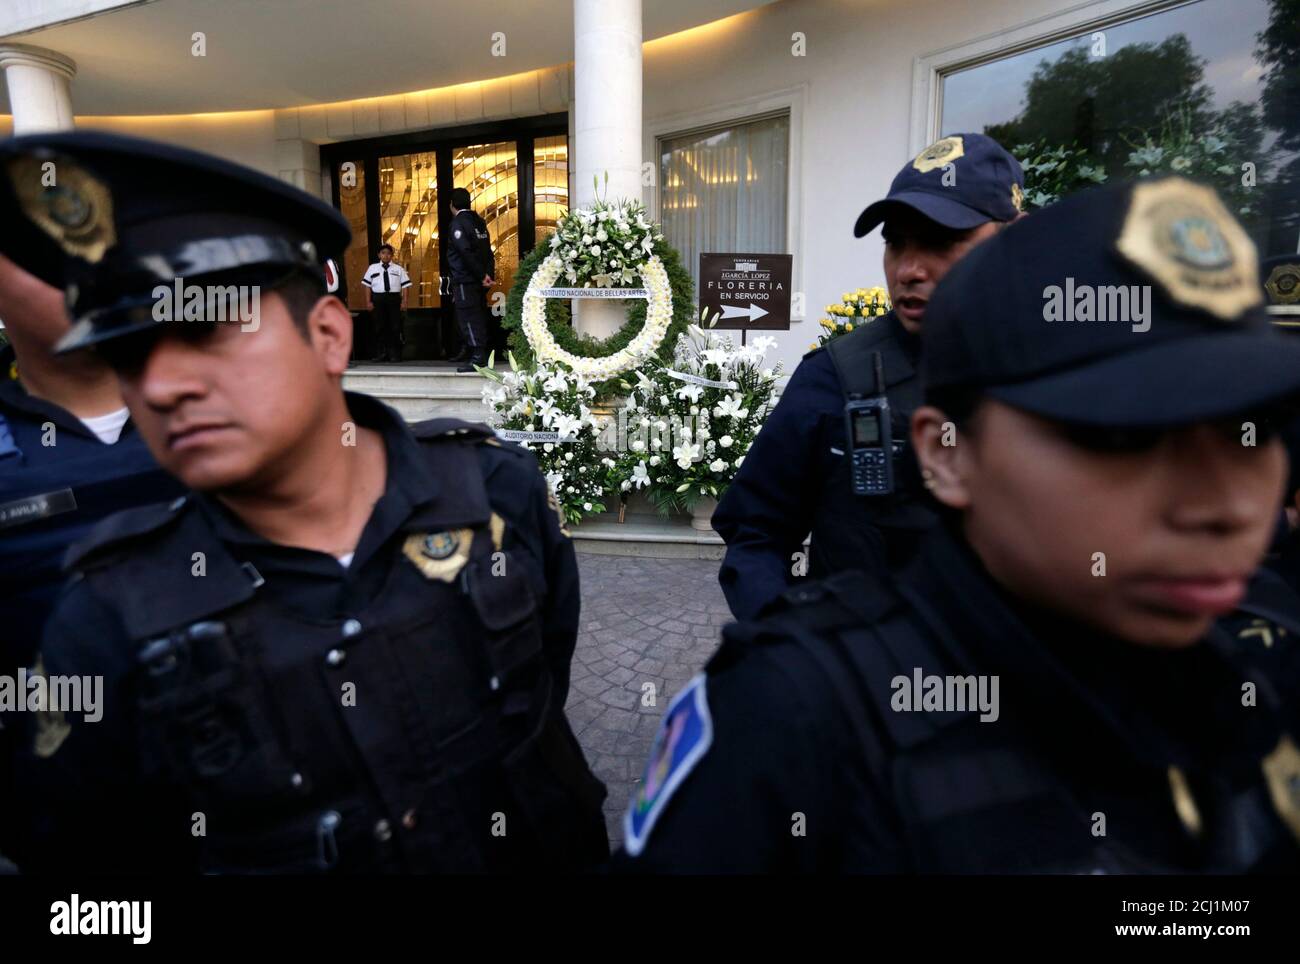 Police officers block the entrance to the funeral home where the body of Colombian Nobel Prize laureate Gabriel Garcia Marquez was taken to, in Mexico City April 17, 2014. Garcia Marquez, the Colombian author whose beguiling stories of love and longing brought Latin America to life for millions of readers and put magical realism on the literary map, died on Thursday. He was 87. Fans will pay their last respects to him in the Palace of Fine Arts in Mexico City on Monday and he will be cremated in a private ceremony. REUTERS/Henry Romero (MEXICO  - Tags: SOCIETY OBITUARY) Stock Photo